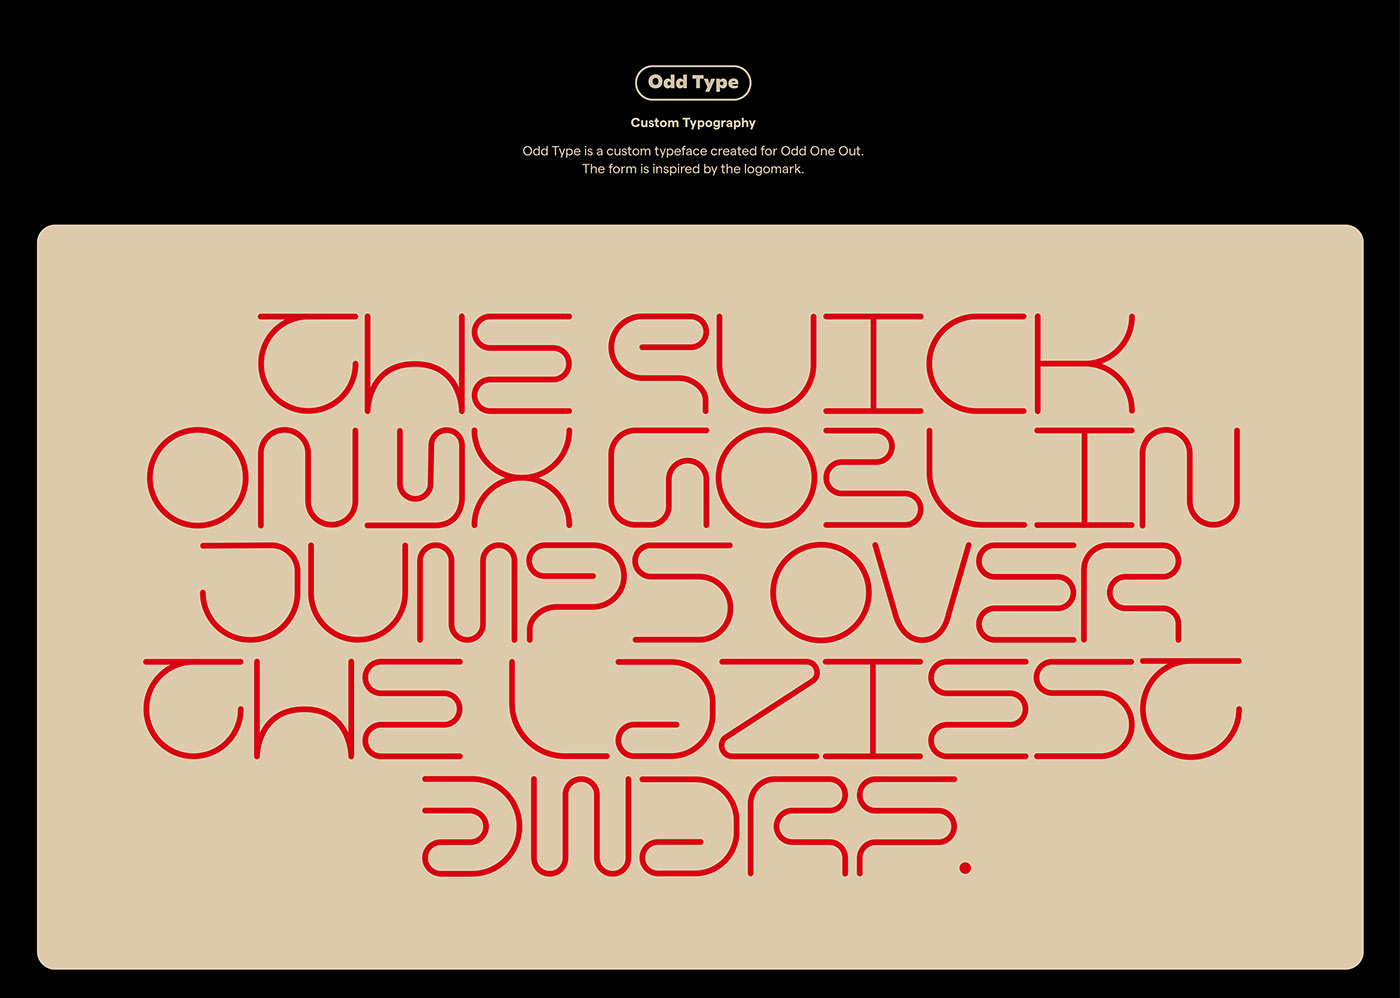 Artifact from the Discover Odd One Out’s Innovative Branding and Visual Identity article on Abduzeedo